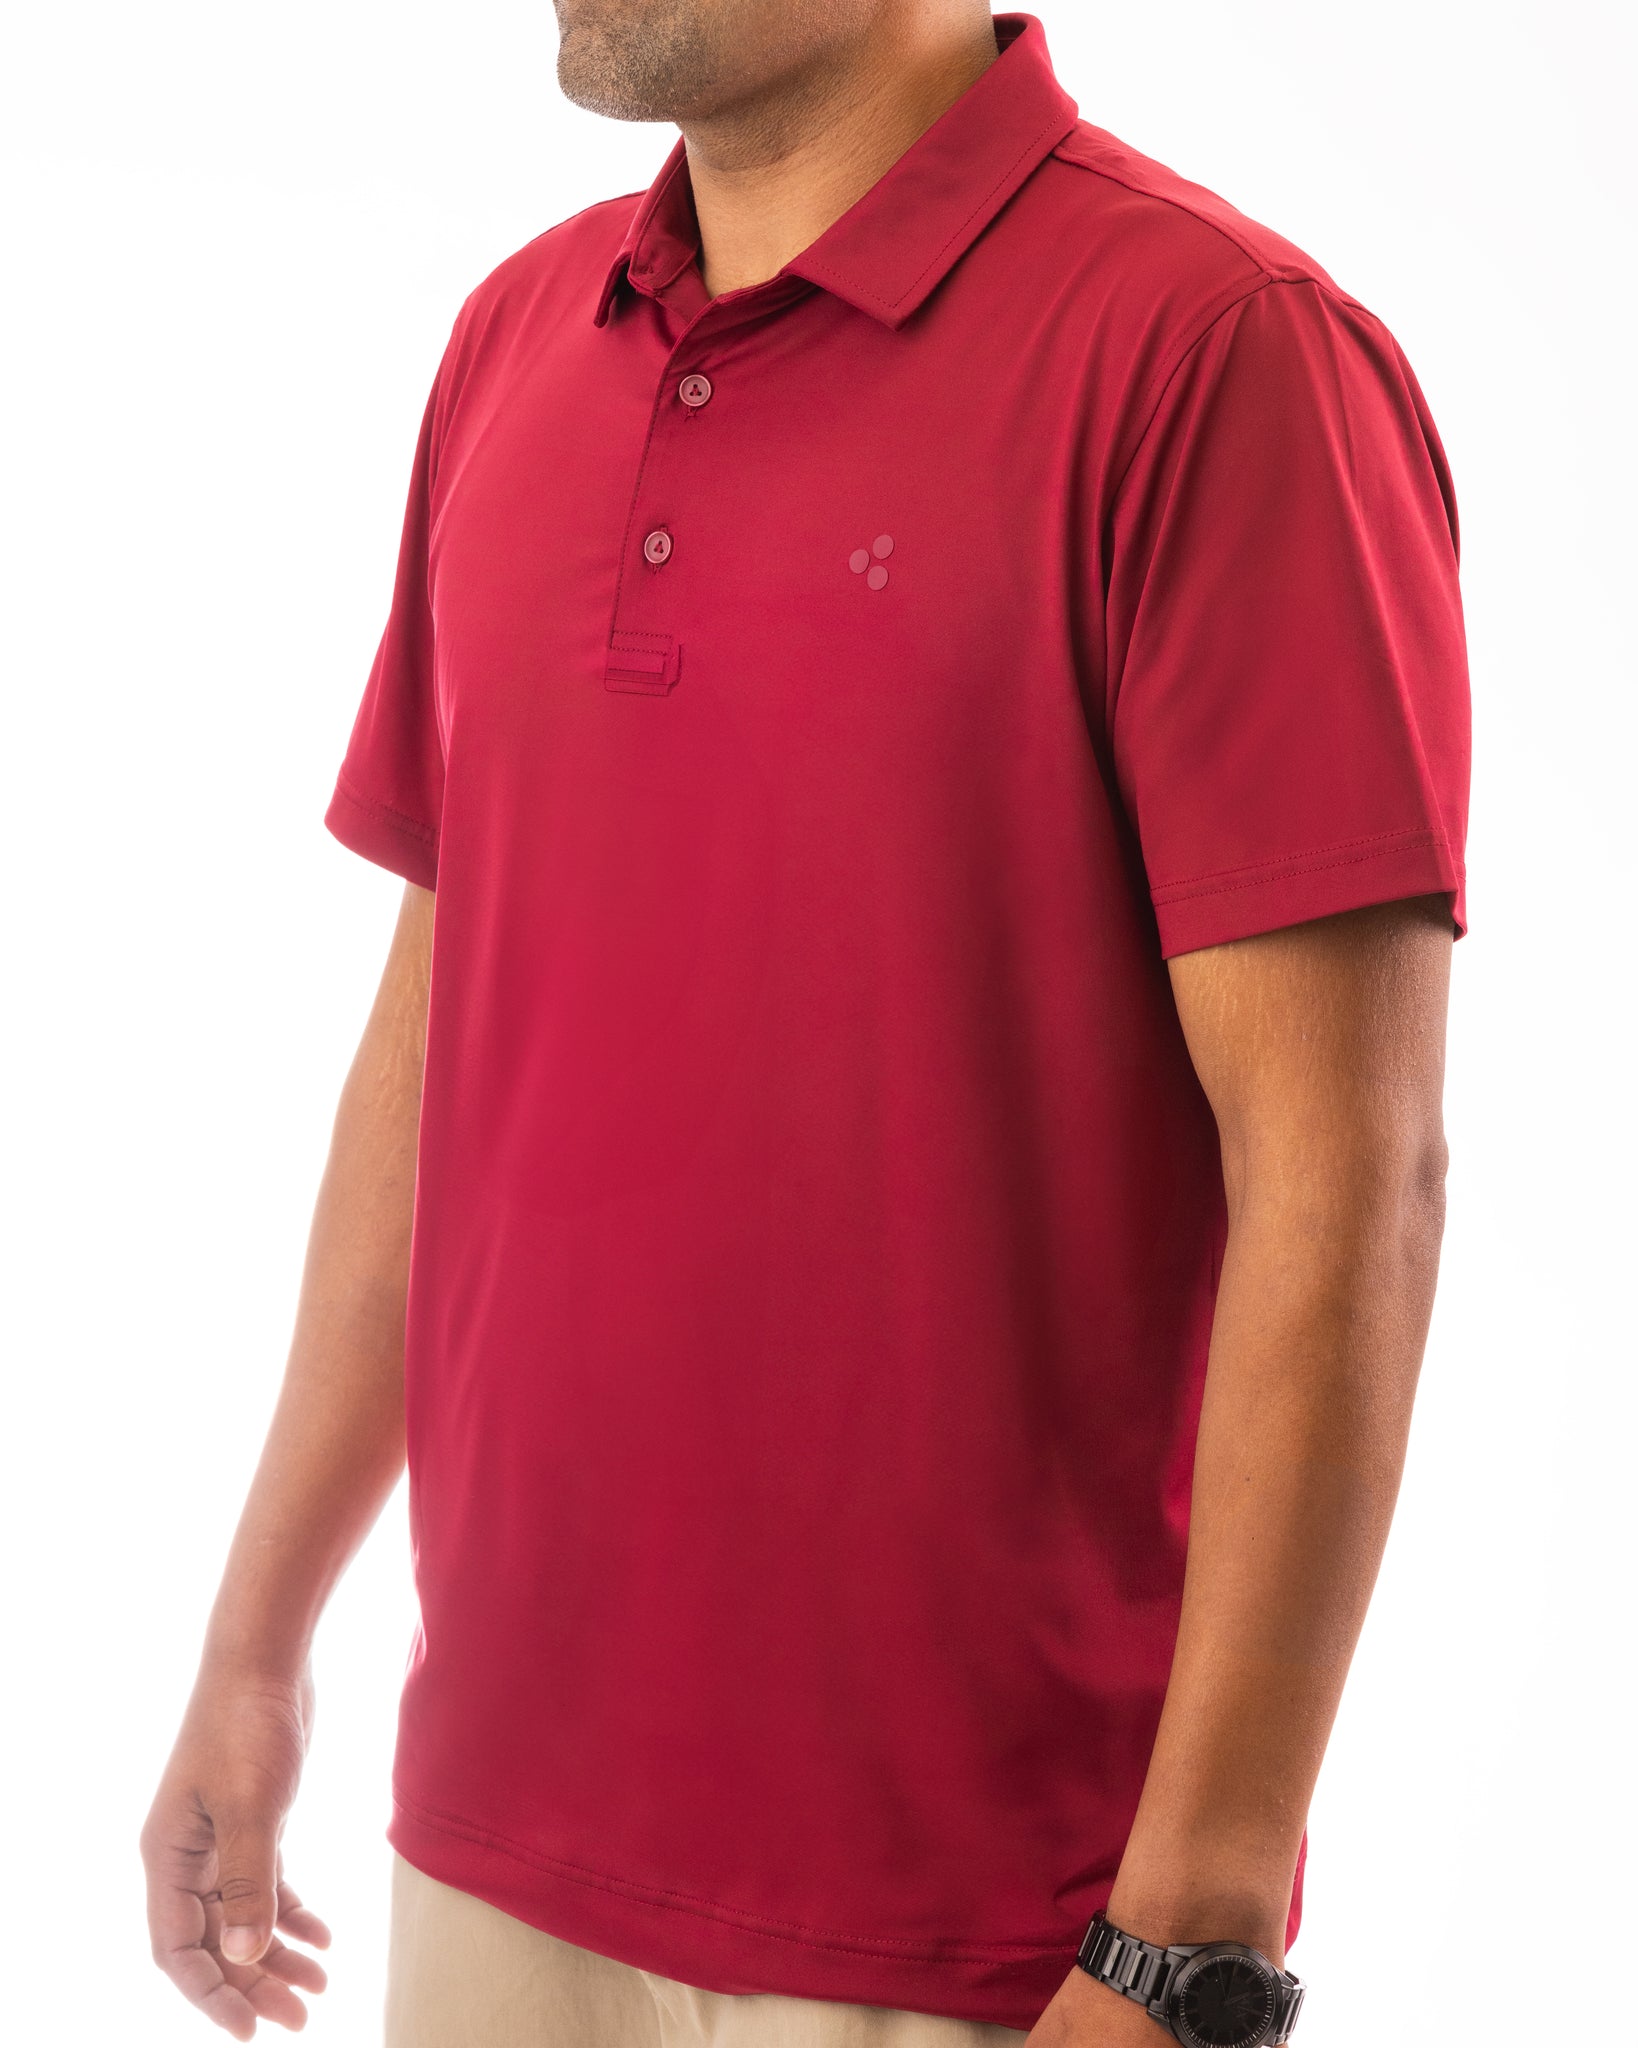 A golf polo that is dark red, like blood, this polo is high performing. It has 4-way stretch, wicks moisture, has an athletic fit and is breathable. 